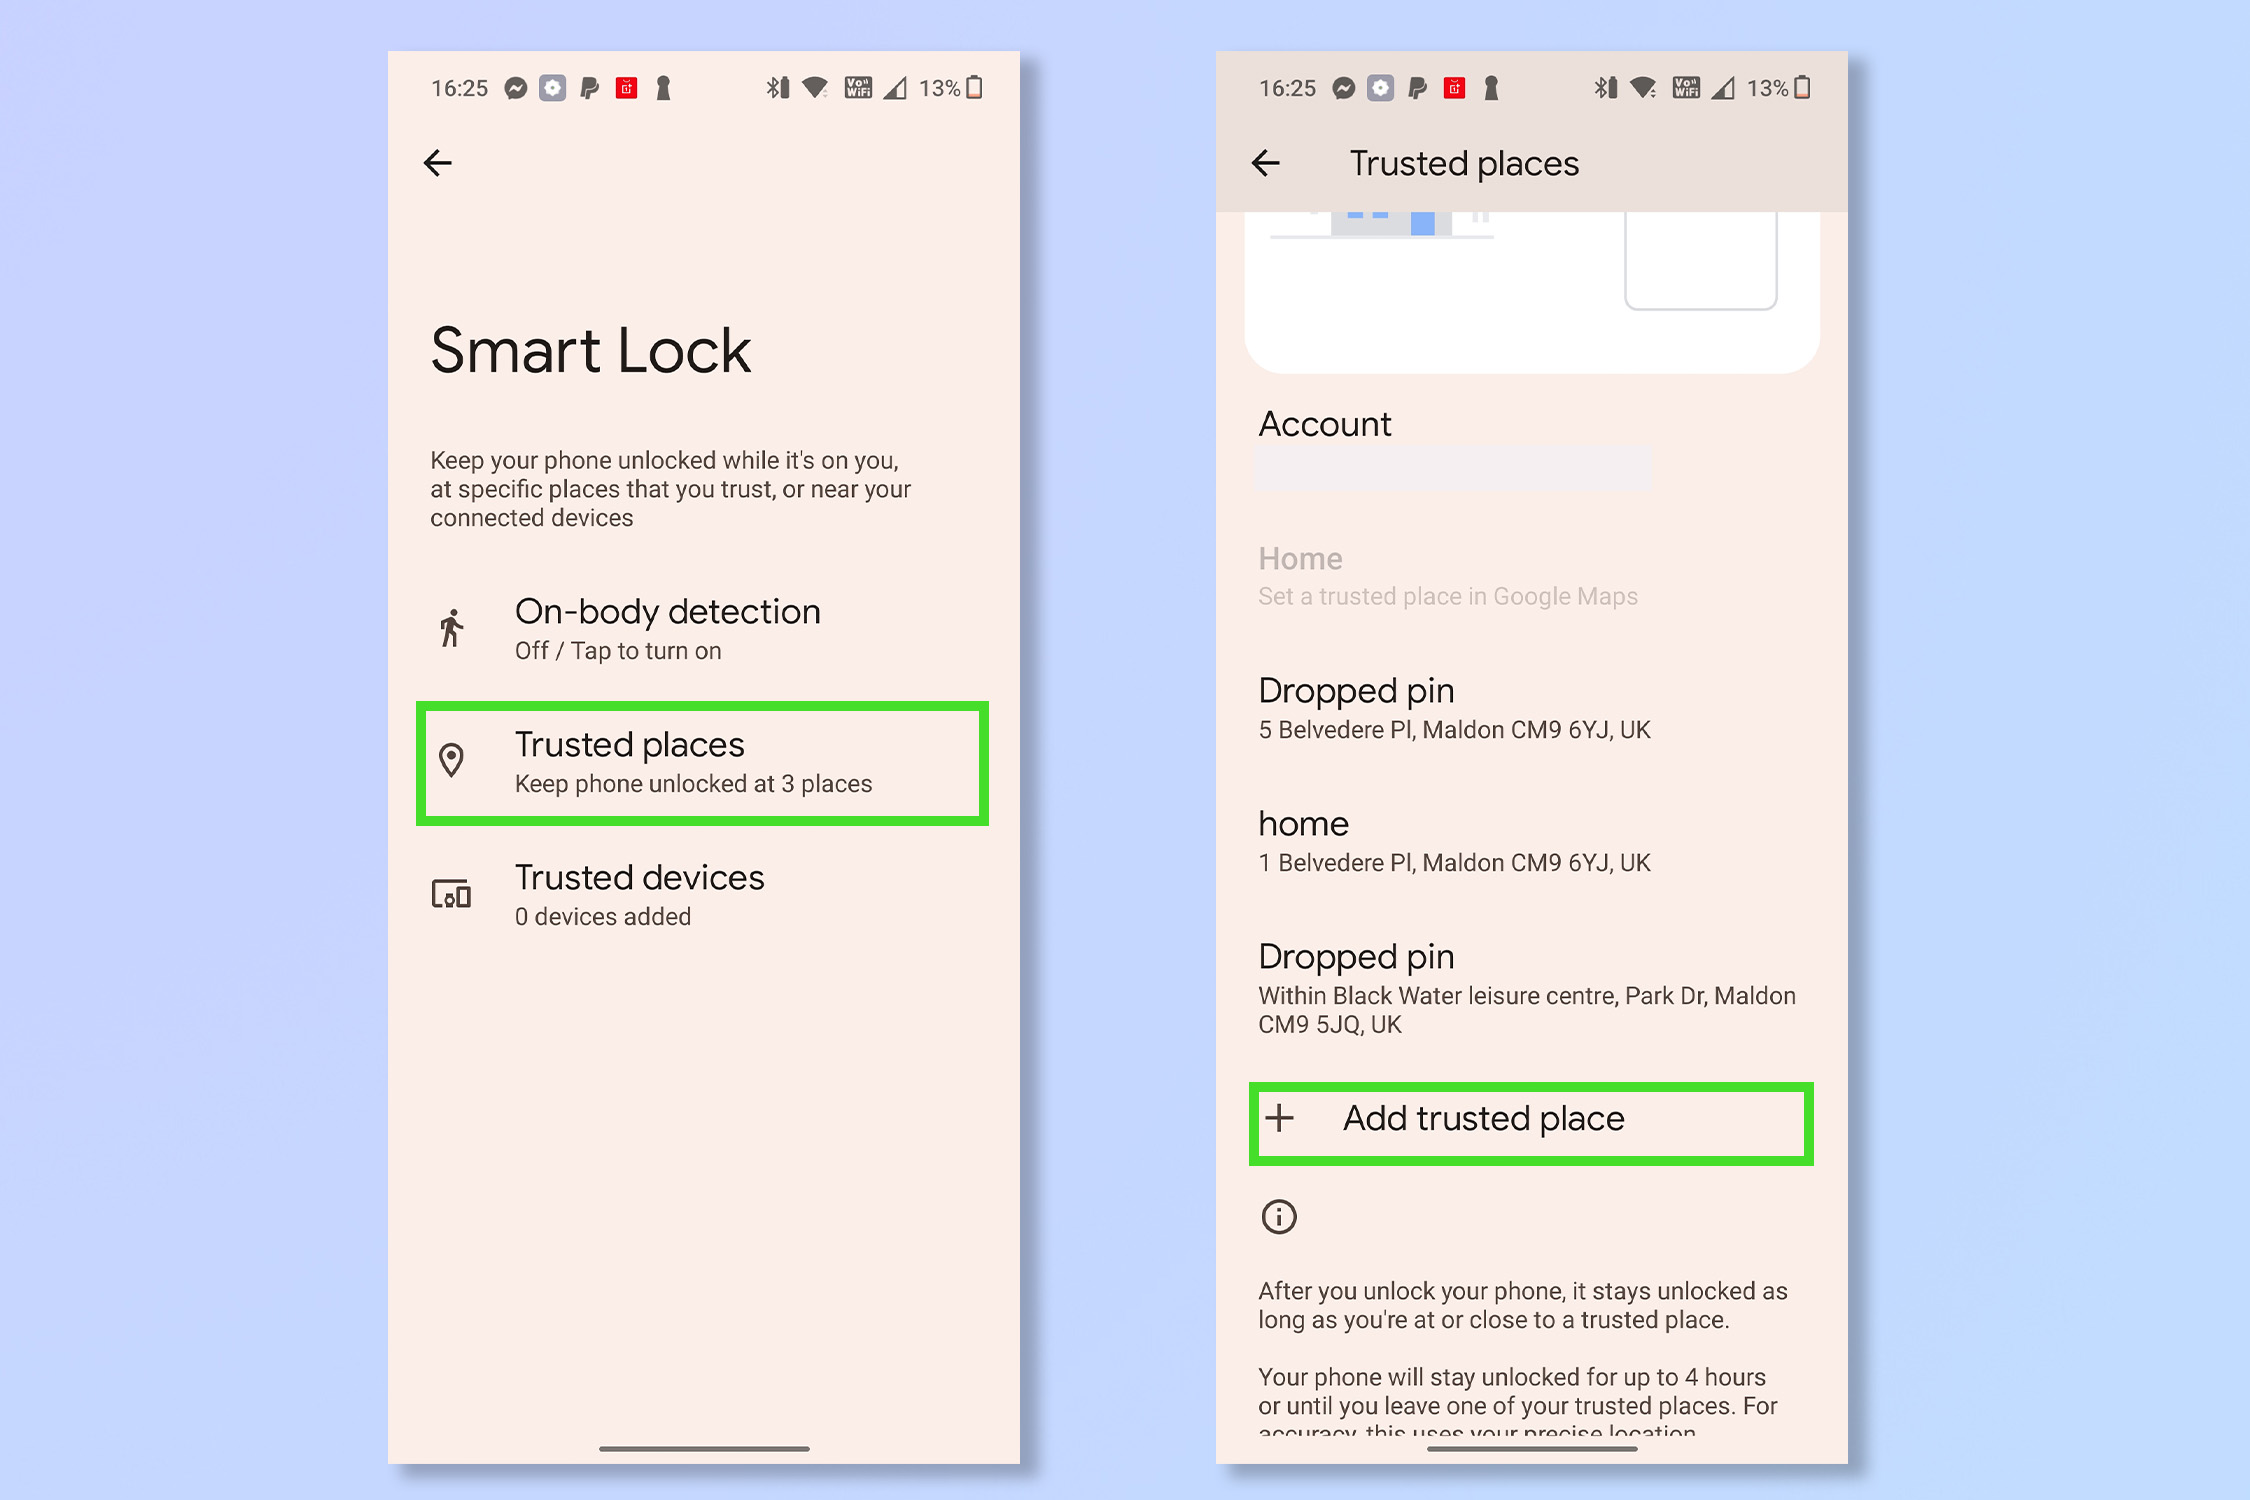 The third step to using Smart Lock on Android